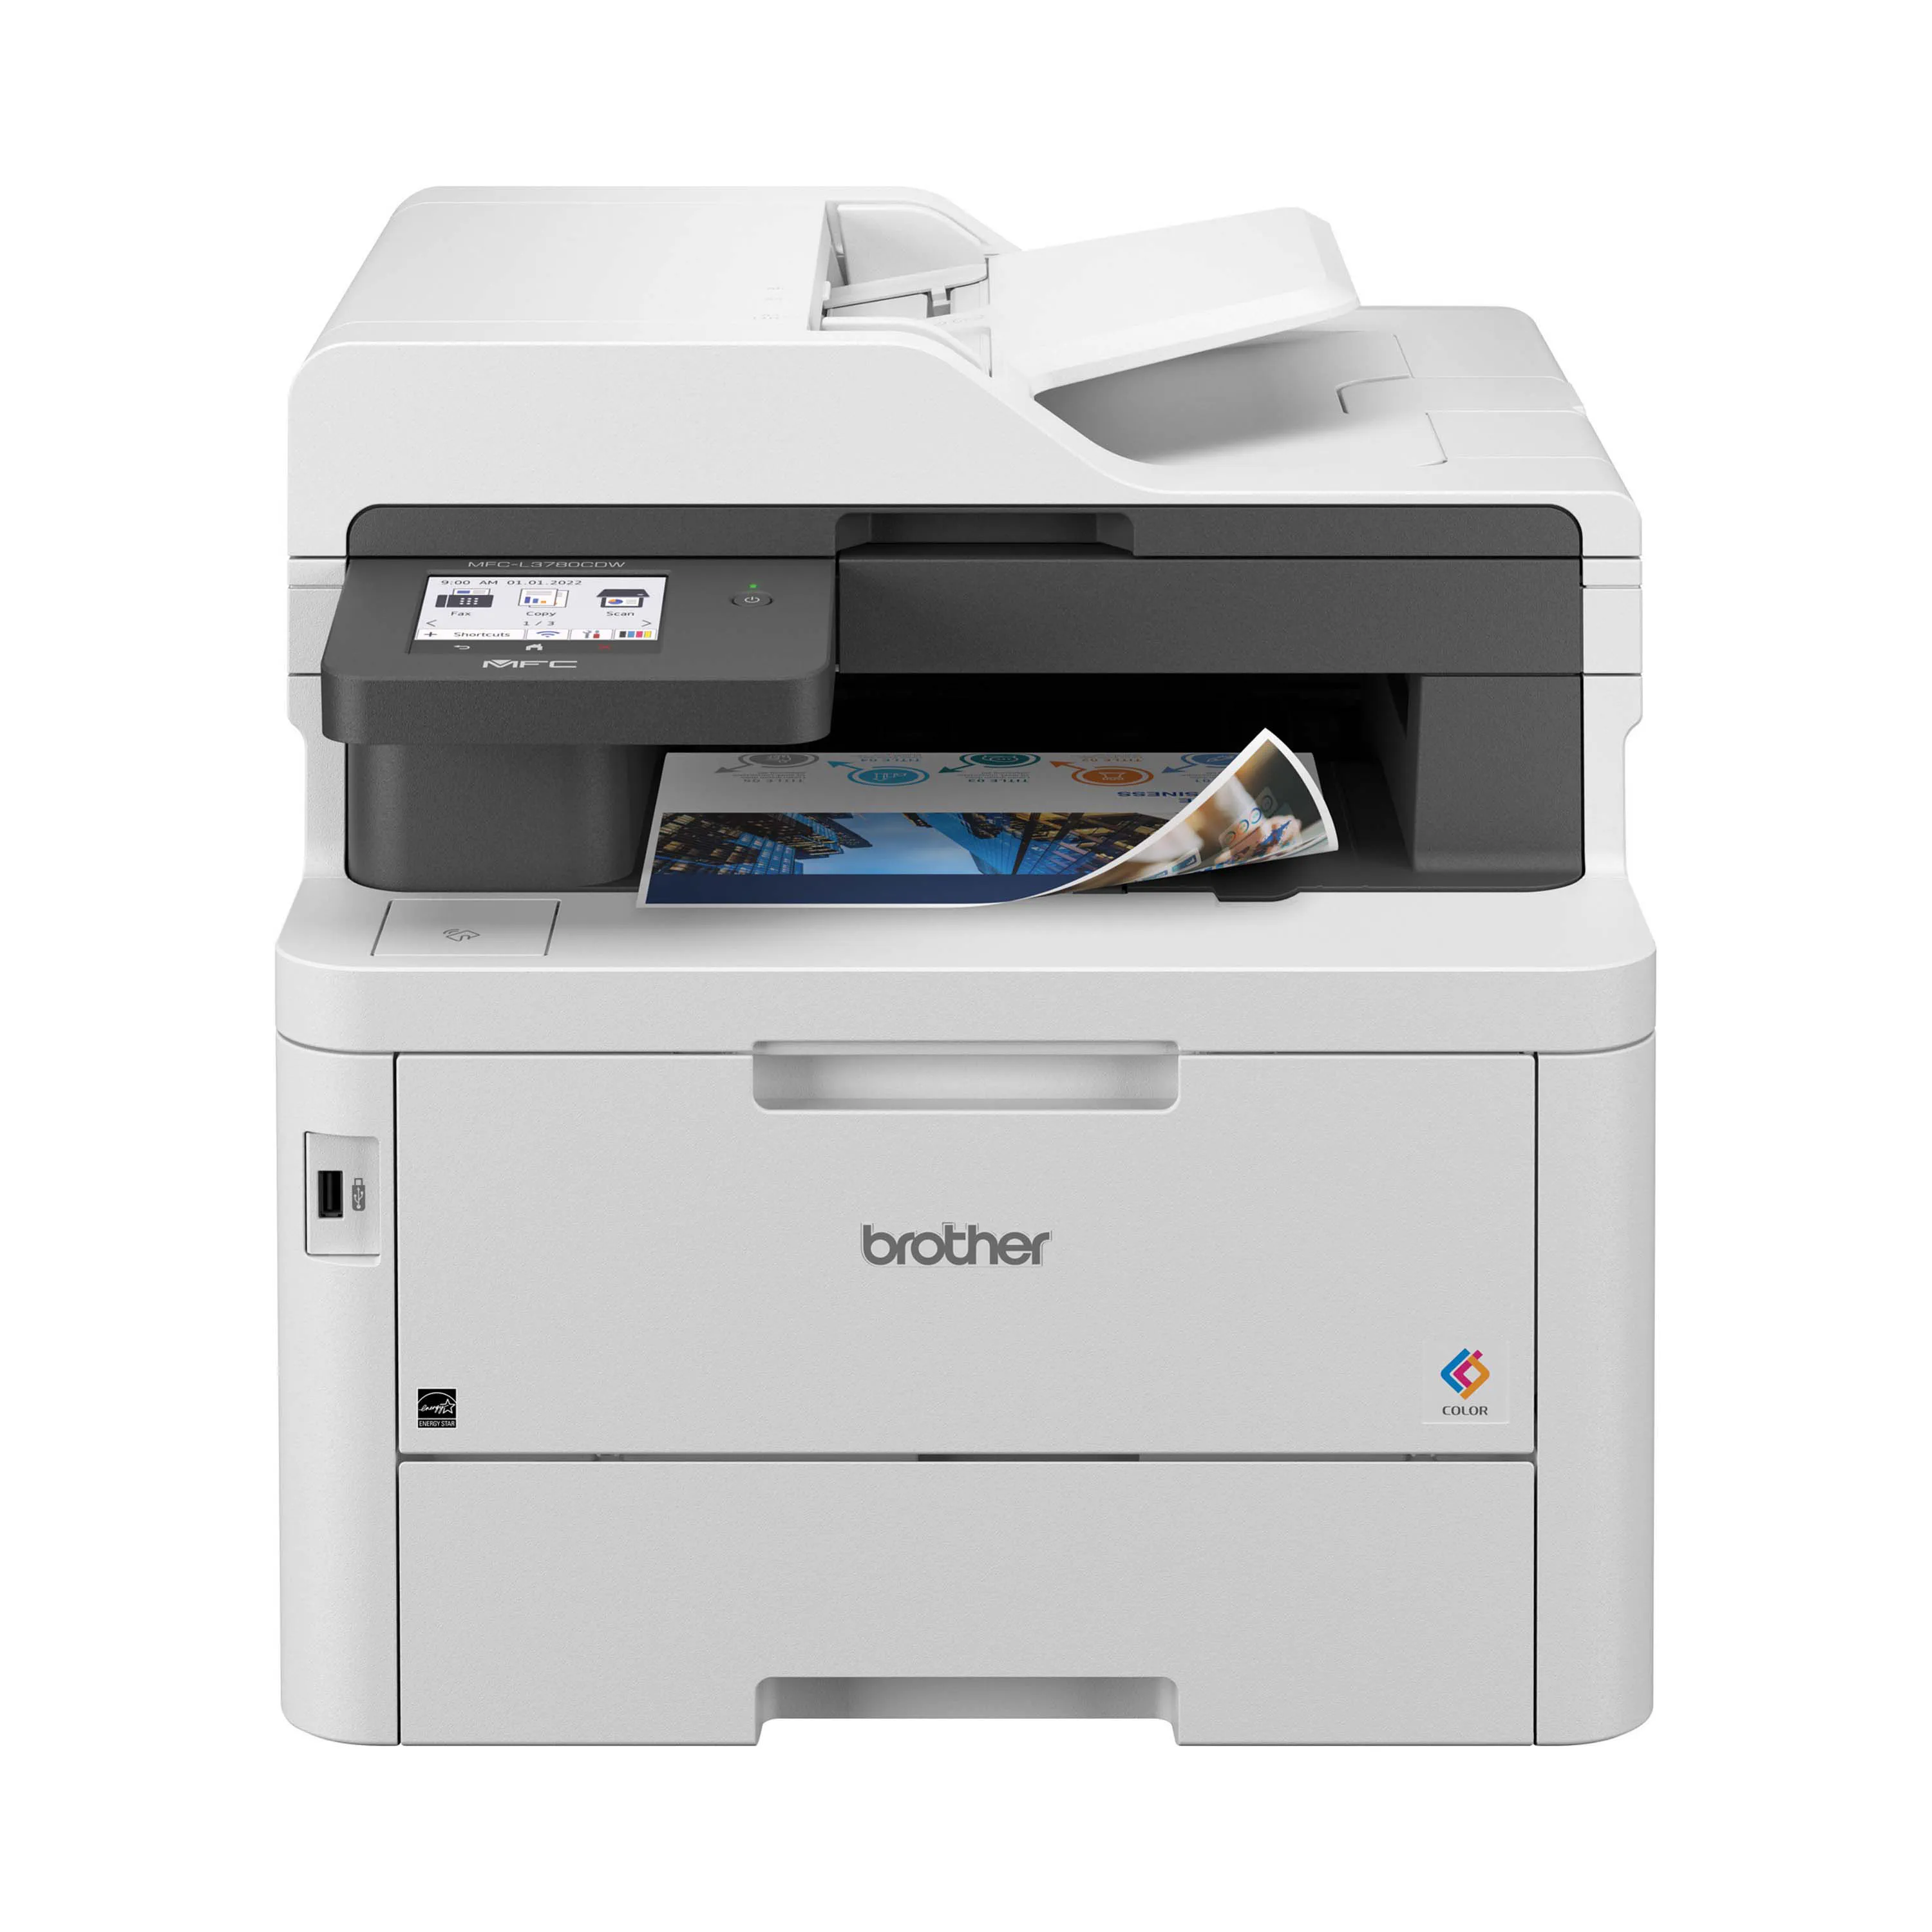 

Brother Digital Color All-in-One Printer with Laser Quality, Copy, Scan, and Fax, Single Pass Duplex Copy and Scan, Duplex and Mobile